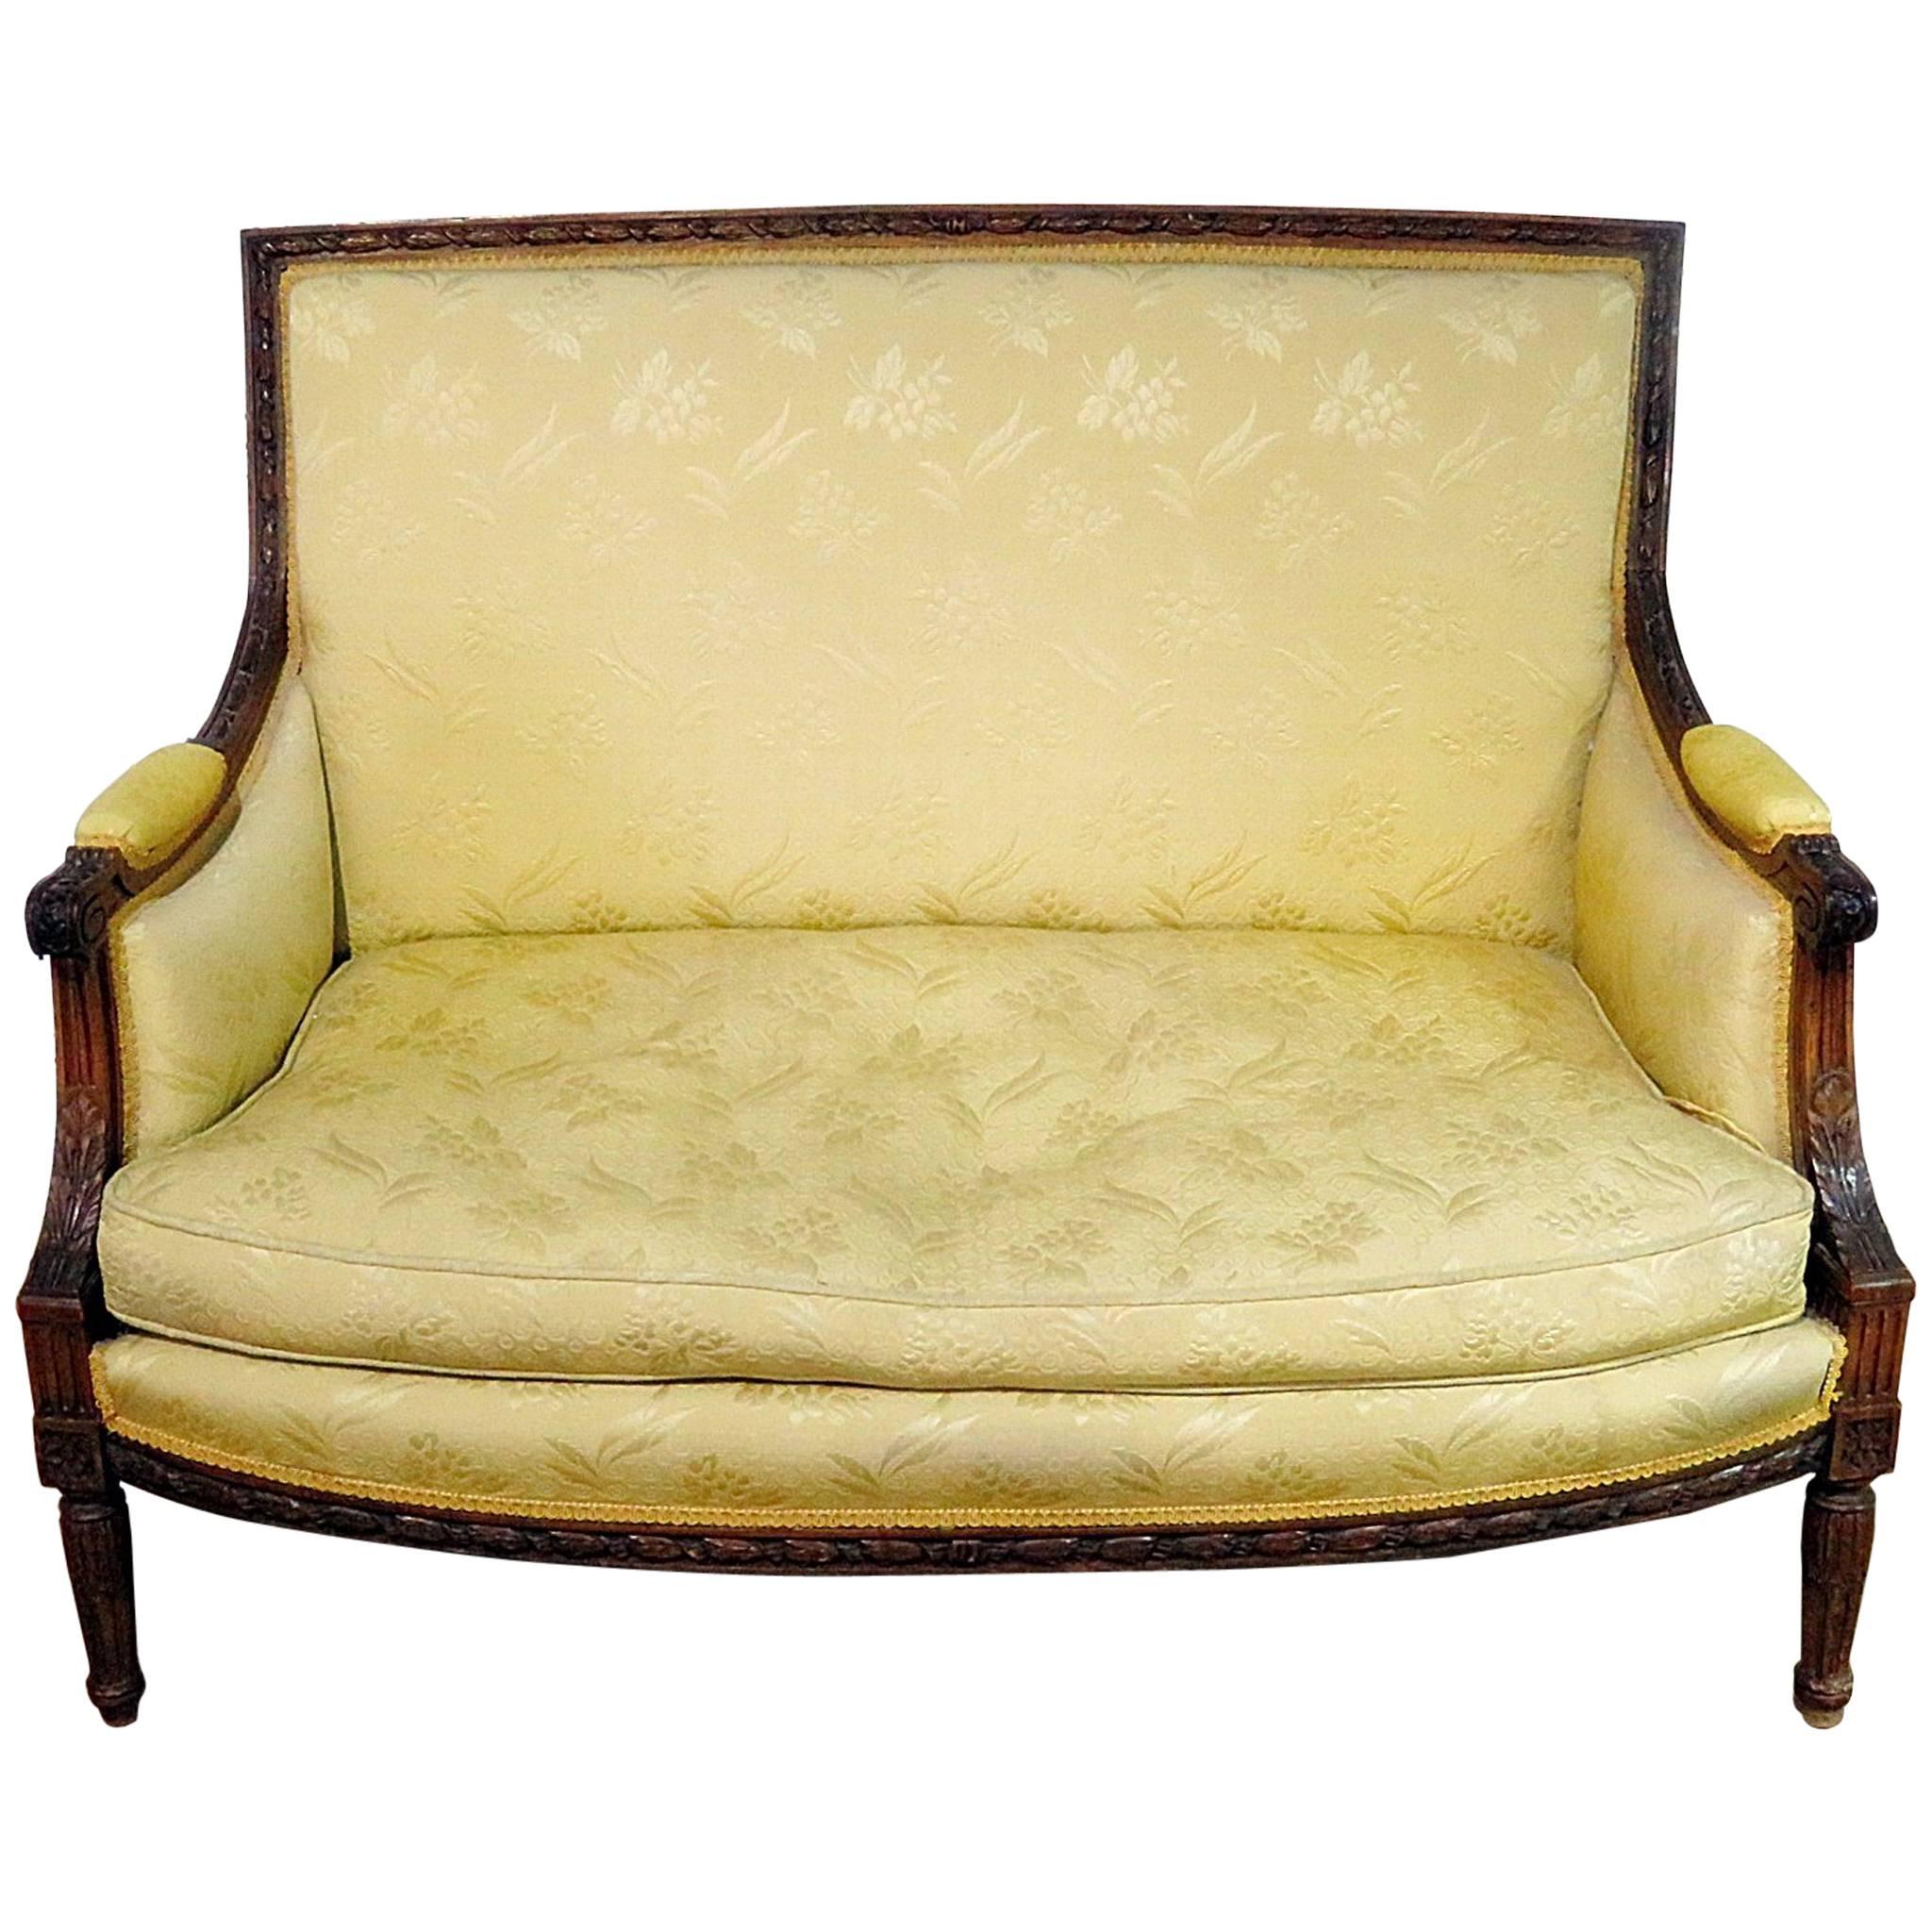 French Maison Jansen Attributed Carved Walnut Settee Canape Marquis C1930s